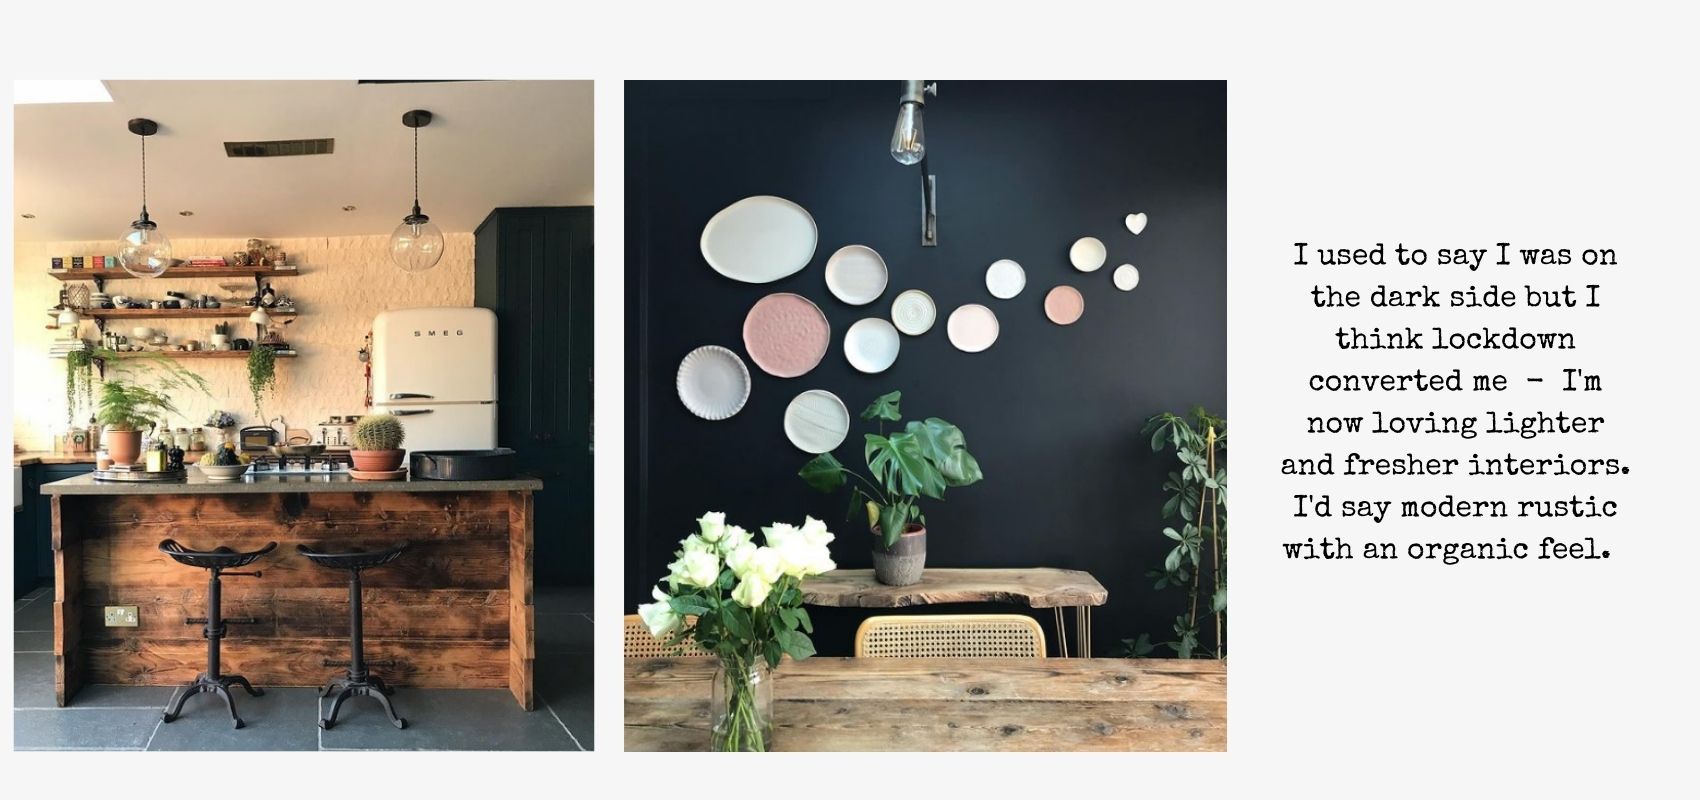 I used to say I was on the darkside, but I think lockdown converted me - I'm now loving lighter and fresher interiors. I'd say modern rustic with an organic feel